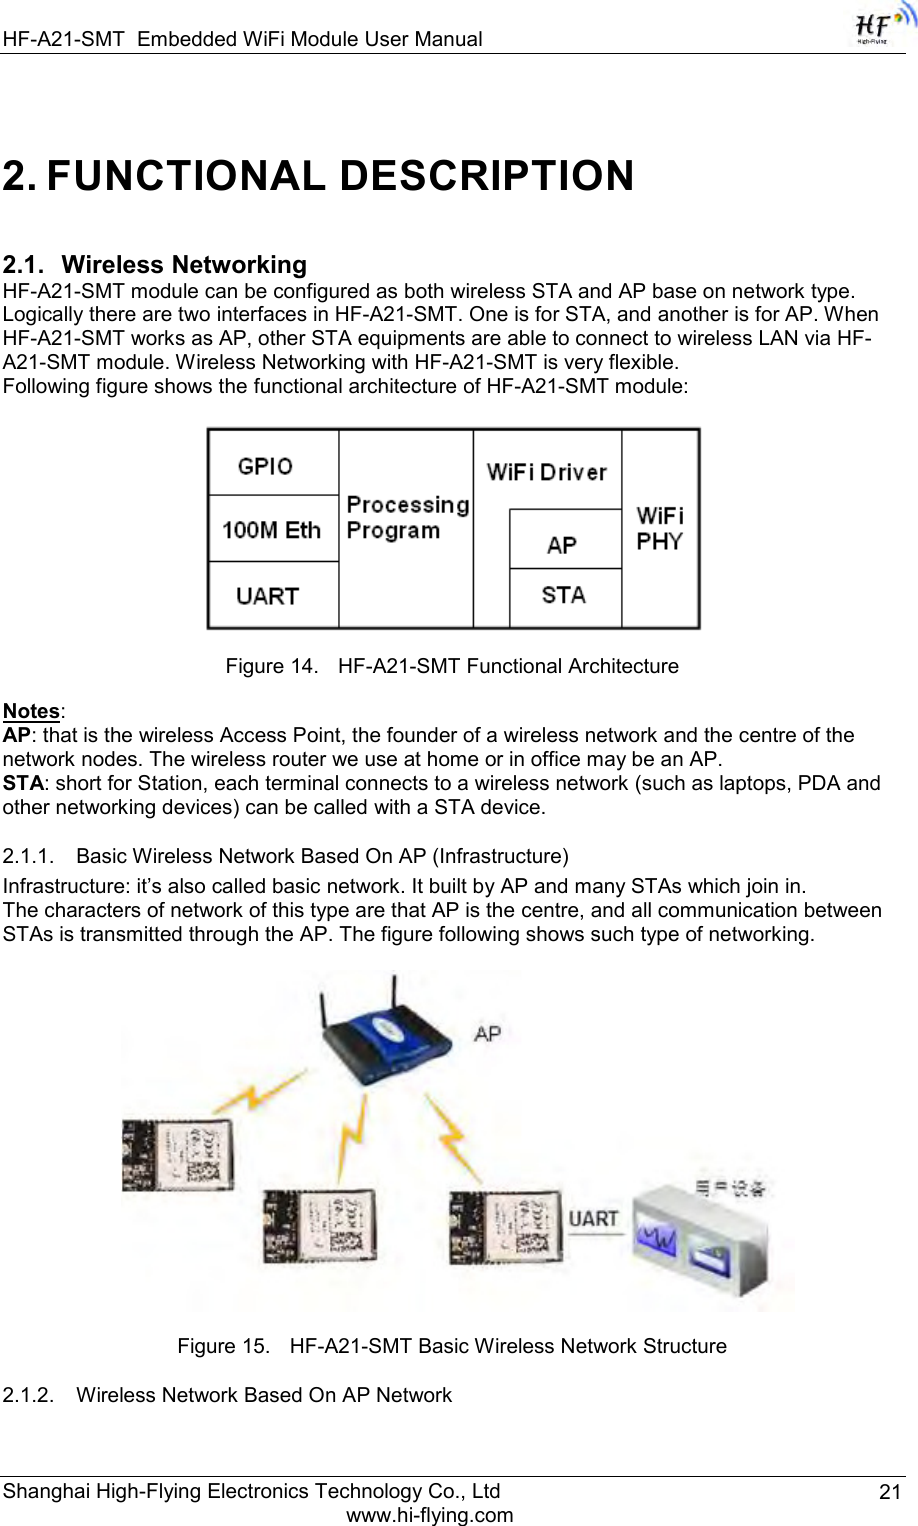 HF-A21-SMT Embedded WiFi Module User Manual Shanghai High-Flying Electronics Technology Co., Ltd www.hi-flying.com 21 2. FUNCTIONAL DESCRIPTION 2.1. Wireless Networking HF-A21-SMT module can be configured as both wireless STA and AP base on network type. Logically there are two interfaces in HF-A21-SMT. One is for STA, and another is for AP. When HF-A21-SMT works as AP, other STA equipments are able to connect to wireless LAN via HF-A21-SMT module. Wireless Networking with HF-A21-SMT is very flexible.   Following figure shows the functional architecture of HF-A21-SMT module:   Figure 14. HF-A21-SMT Functional Architecture Notes: AP: that is the wireless Access Point, the founder of a wireless network and the centre of the network nodes. The wireless router we use at home or in office may be an AP.  STA: short for Station, each terminal connects to a wireless network (such as laptops, PDA and other networking devices) can be called with a STA device.  2.1.1. Basic Wireless Network Based On AP (Infrastructure) Infrastructure: it‟s also called basic network. It built by AP and many STAs which join in. The characters of network of this type are that AP is the centre, and all communication between STAs is transmitted through the AP. The figure following shows such type of networking.   Figure 15. HF-A21-SMT Basic Wireless Network Structure 2.1.2. Wireless Network Based On AP Network   